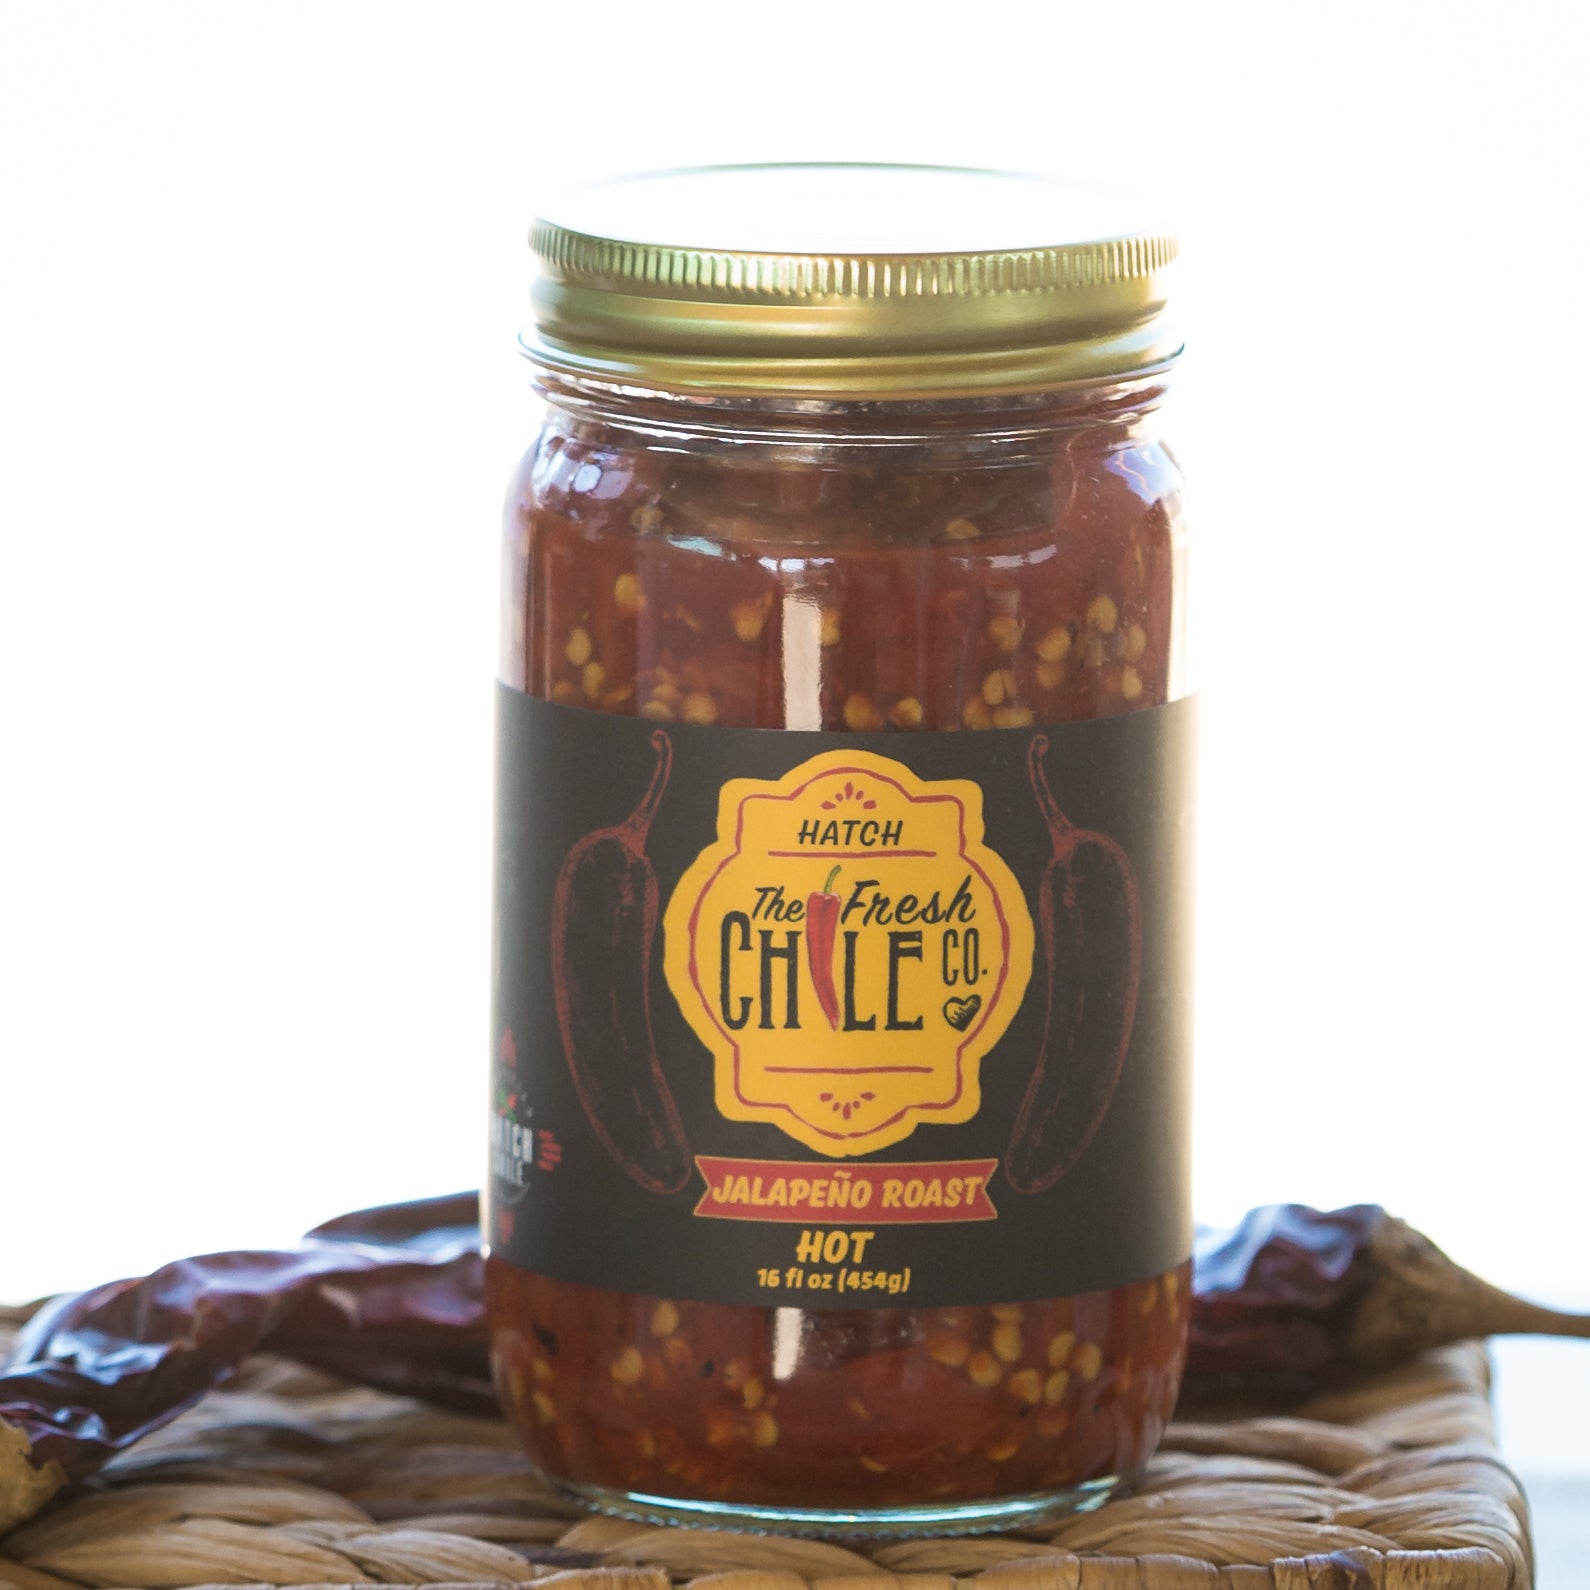 A jar of Hatch Red Jalapeño Roast hot sauce on a woven mat, prominently displayed with a label featuring red jalapeños and descriptive text.